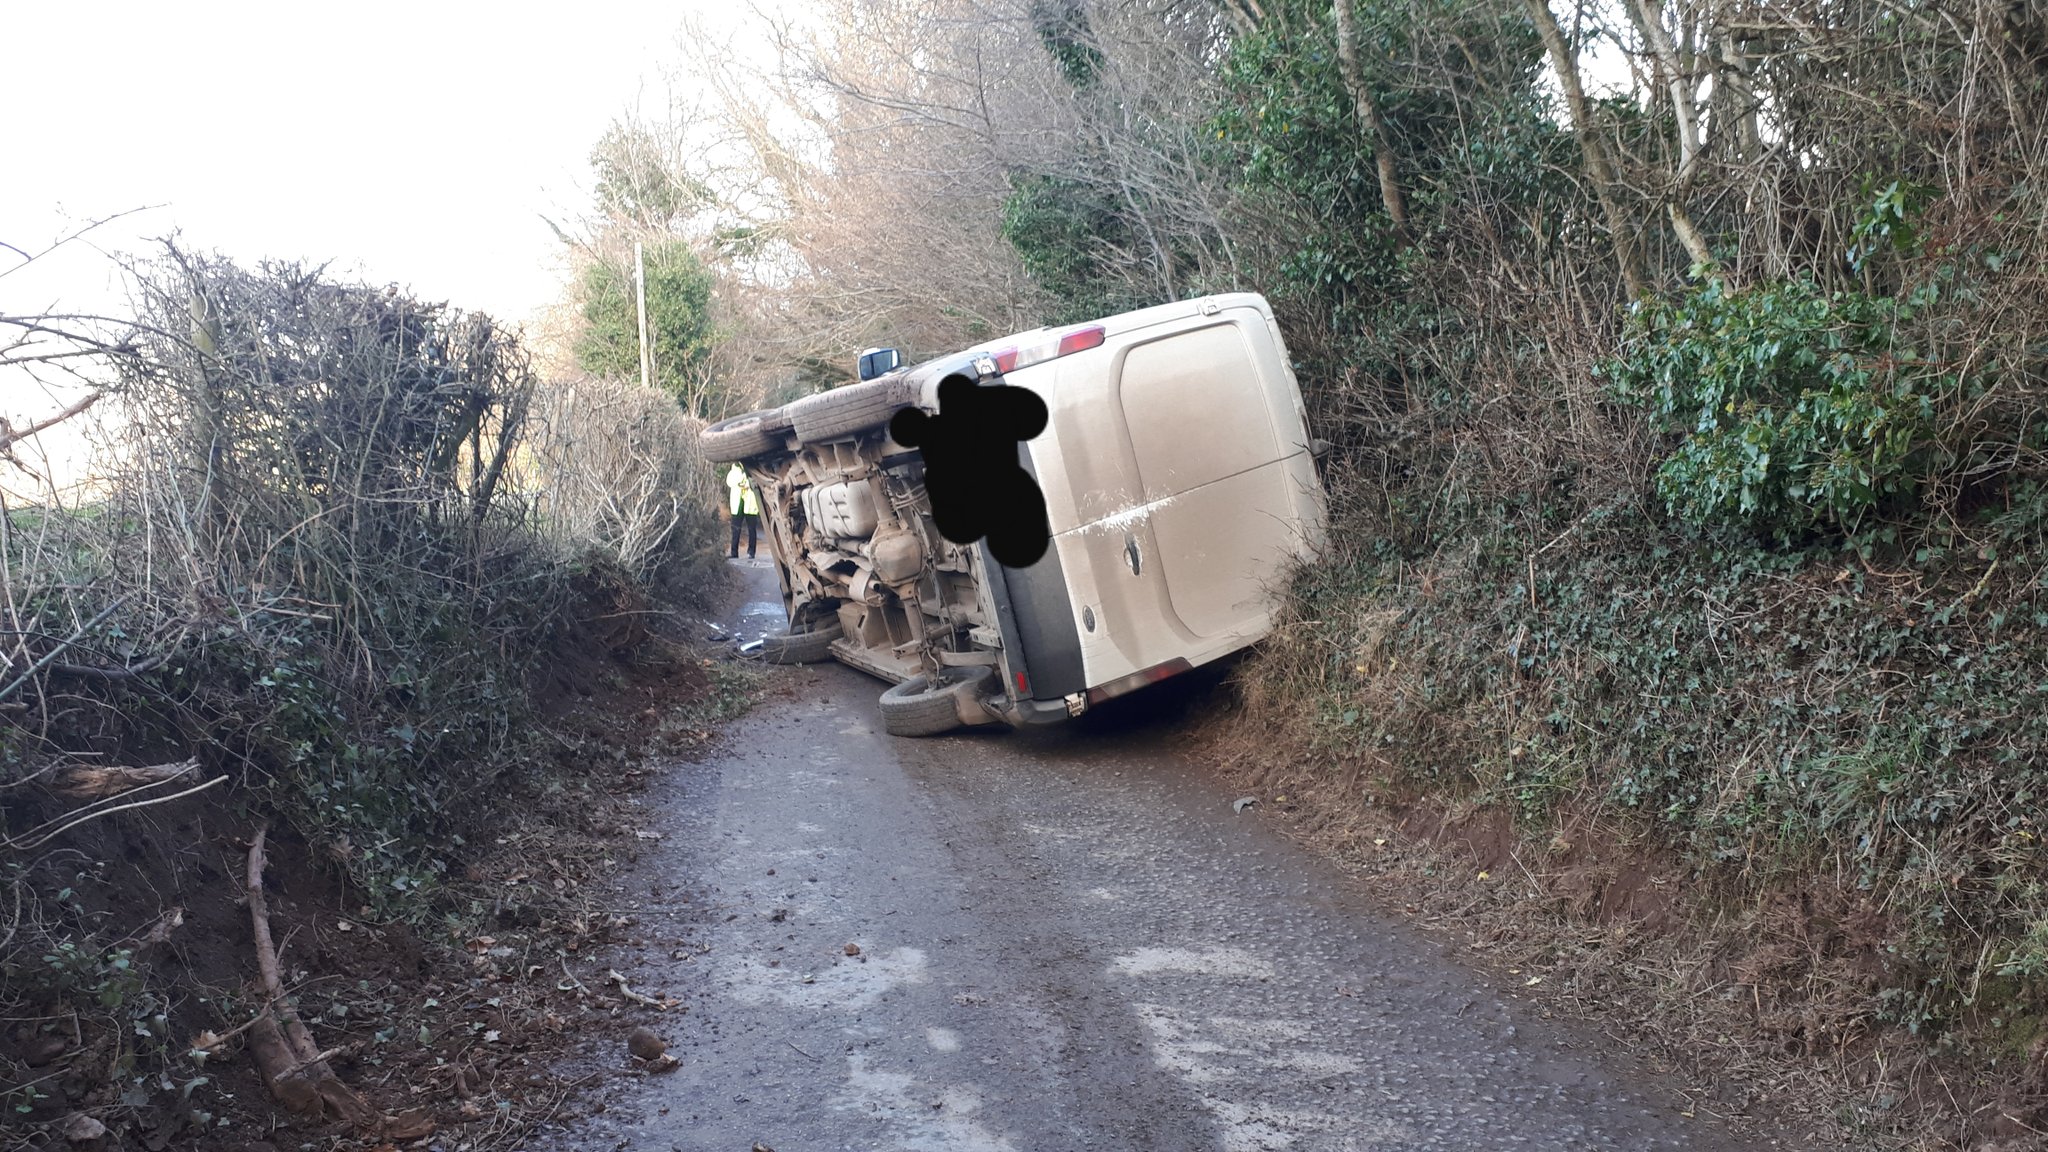 NEWS | Emergency services called after vehicle overturns on a country lane in Herefordshire